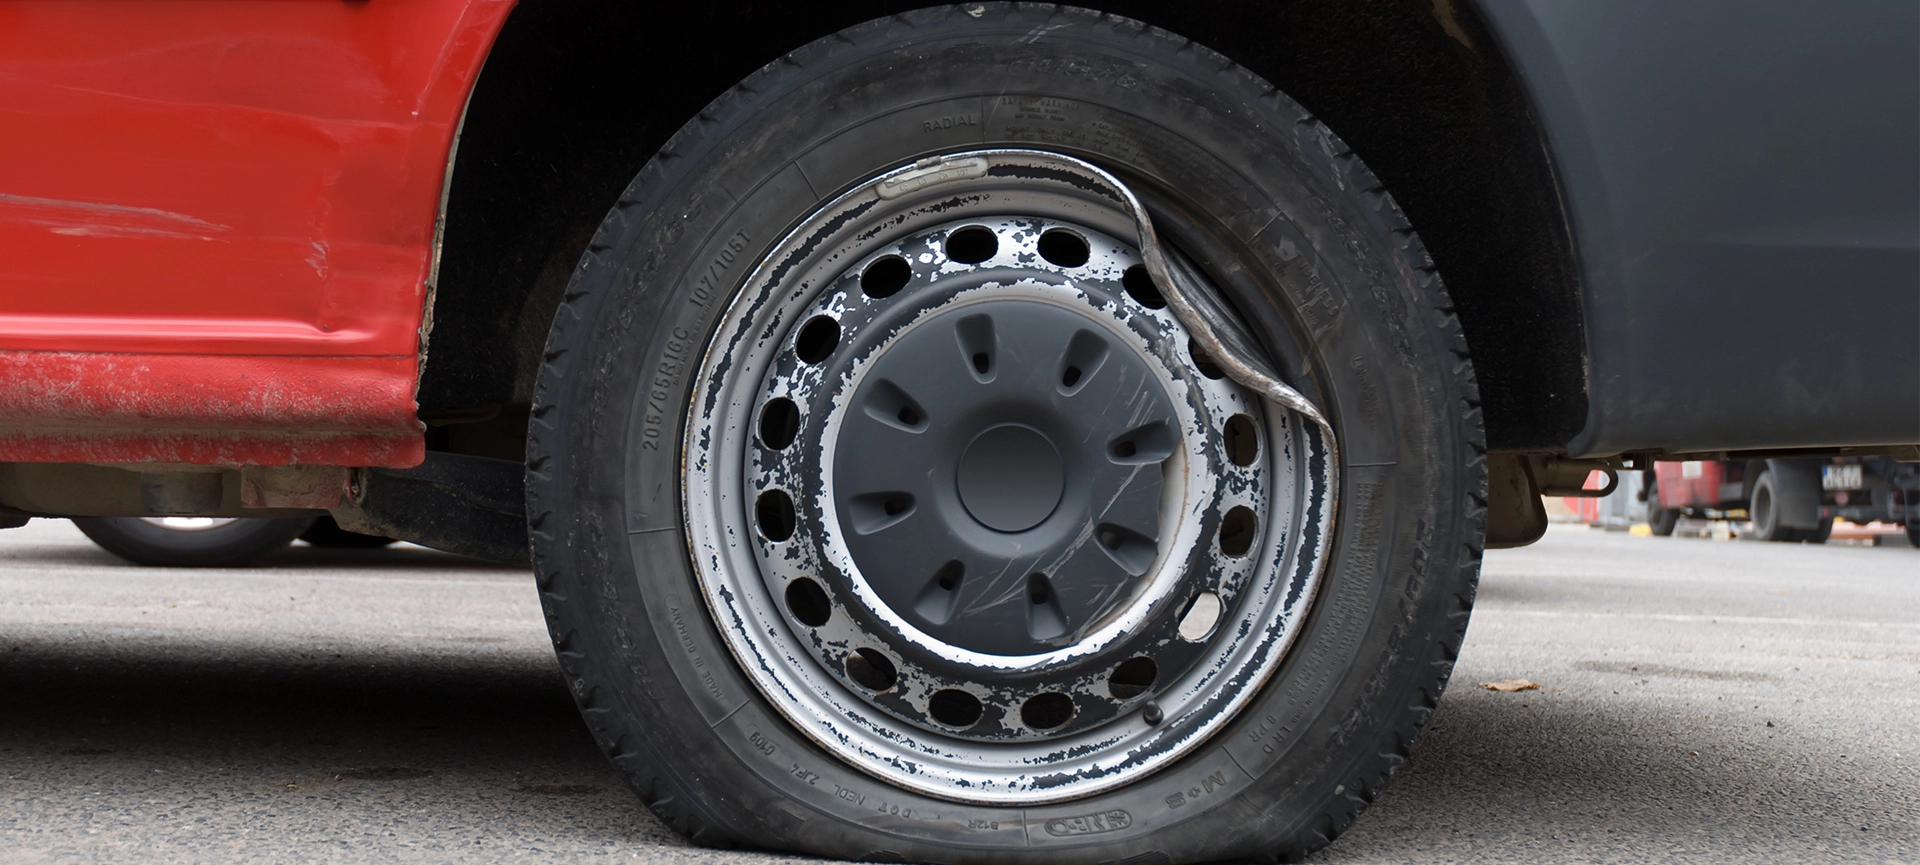 5 Common Causes of Rim Damage and How to Prevent Them